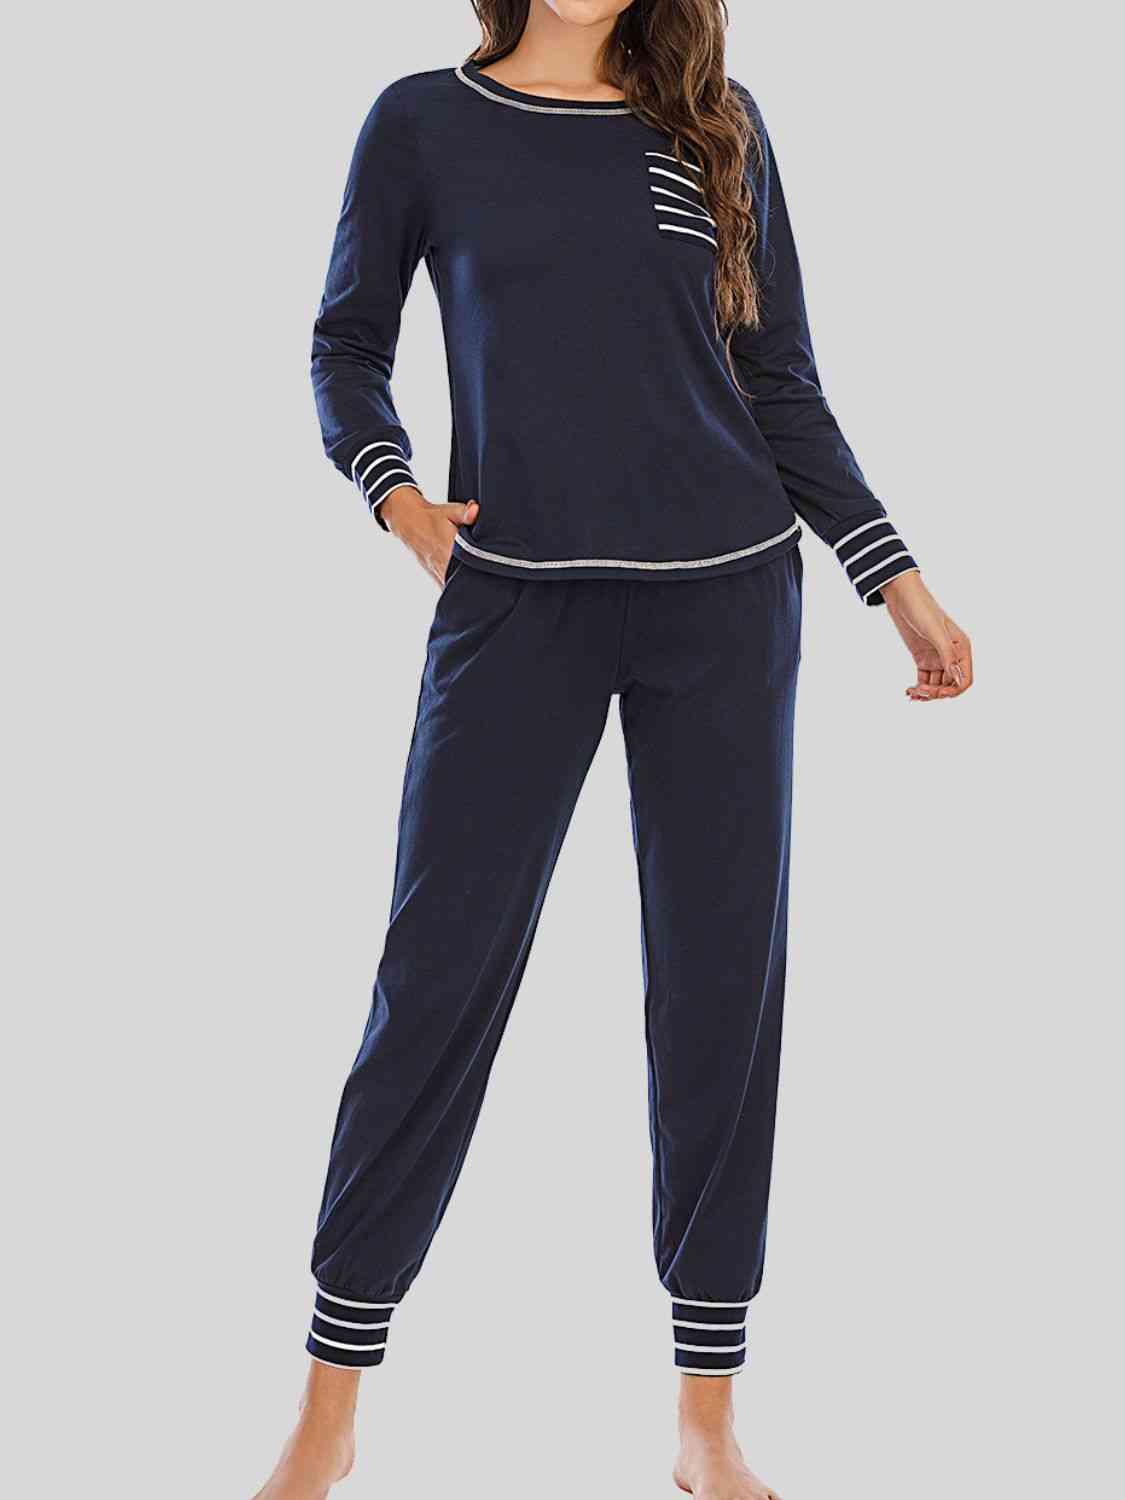 Round Neck Top and Pants Lounge Set (3 Colors) Loungewear Krazy Heart Designs Boutique Dark Navy S 